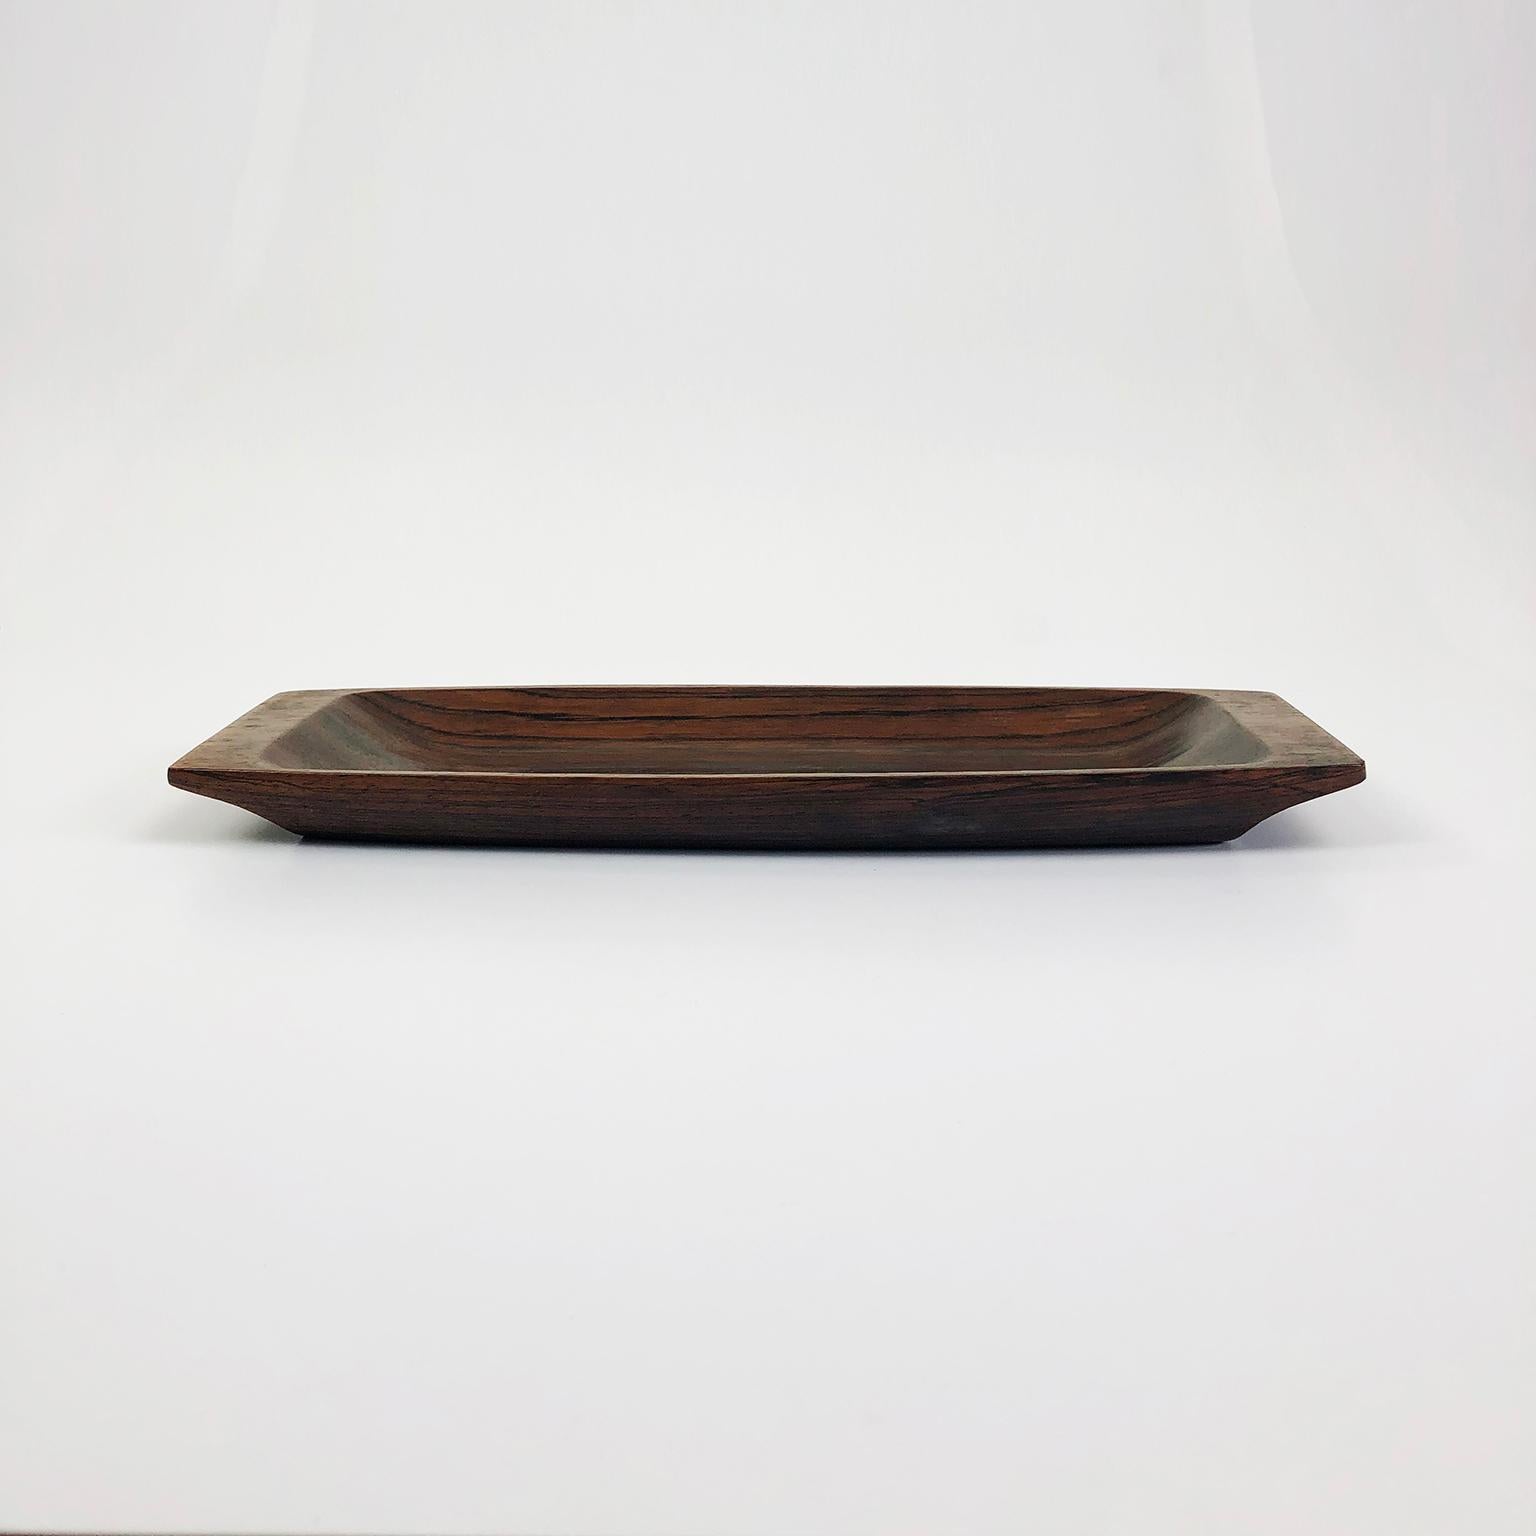 We offer this Brazilian Jacaranda wood tray designed by Jean Gillon, circa 1960. Excellent vintage condition, very minor scratches on underside consistent with age and use. Includes original label of Wood Art with 1 of 205 serial number.